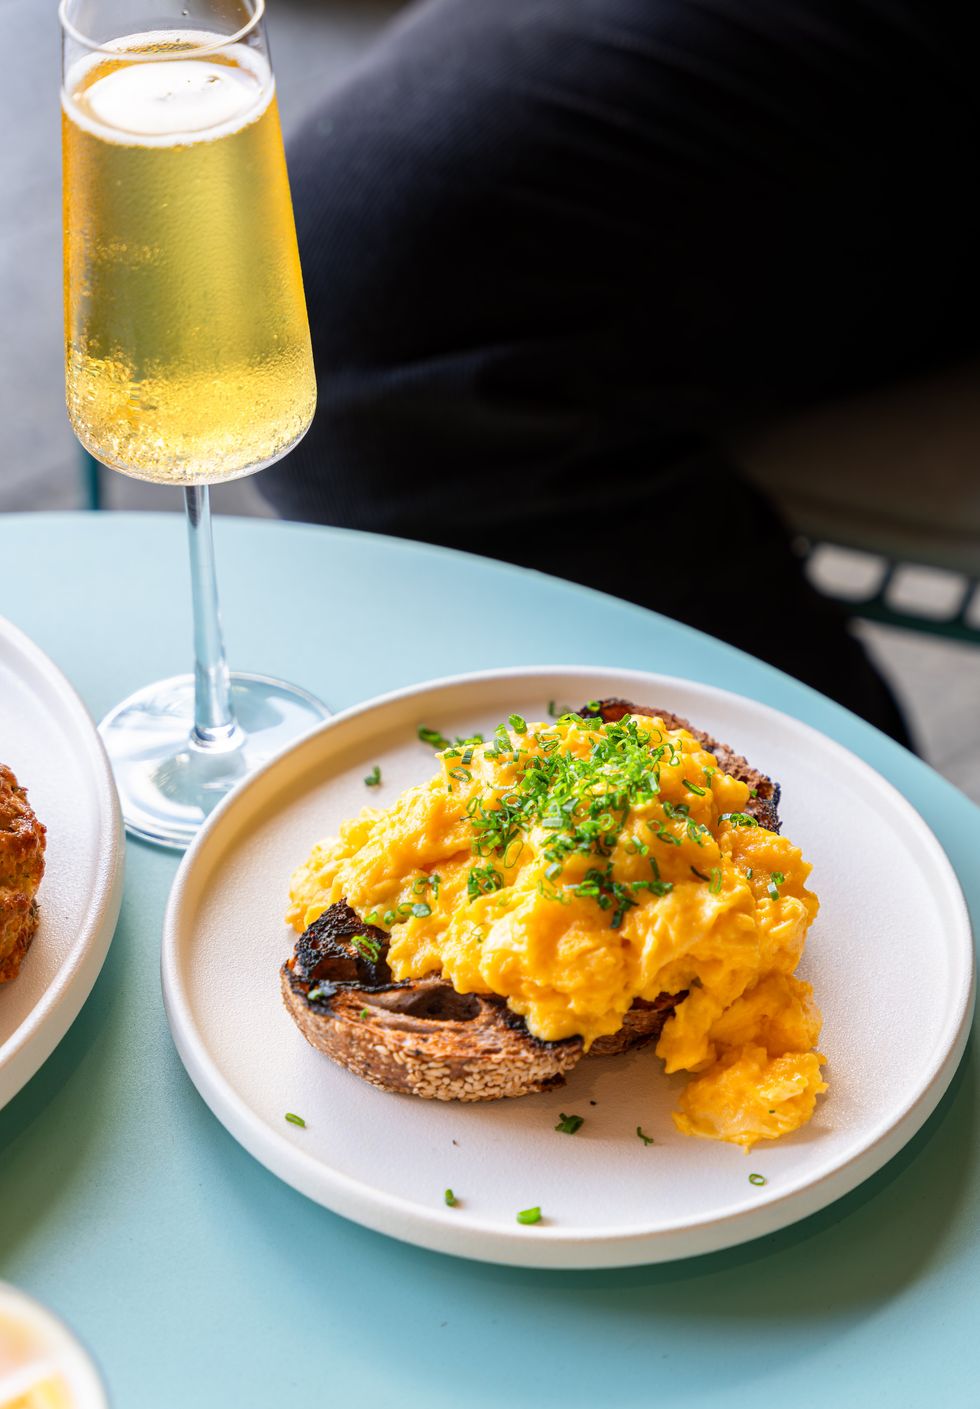 Scrambled egg on an English muffin sitting on a white plate. A glass of Champagne is next to the dish